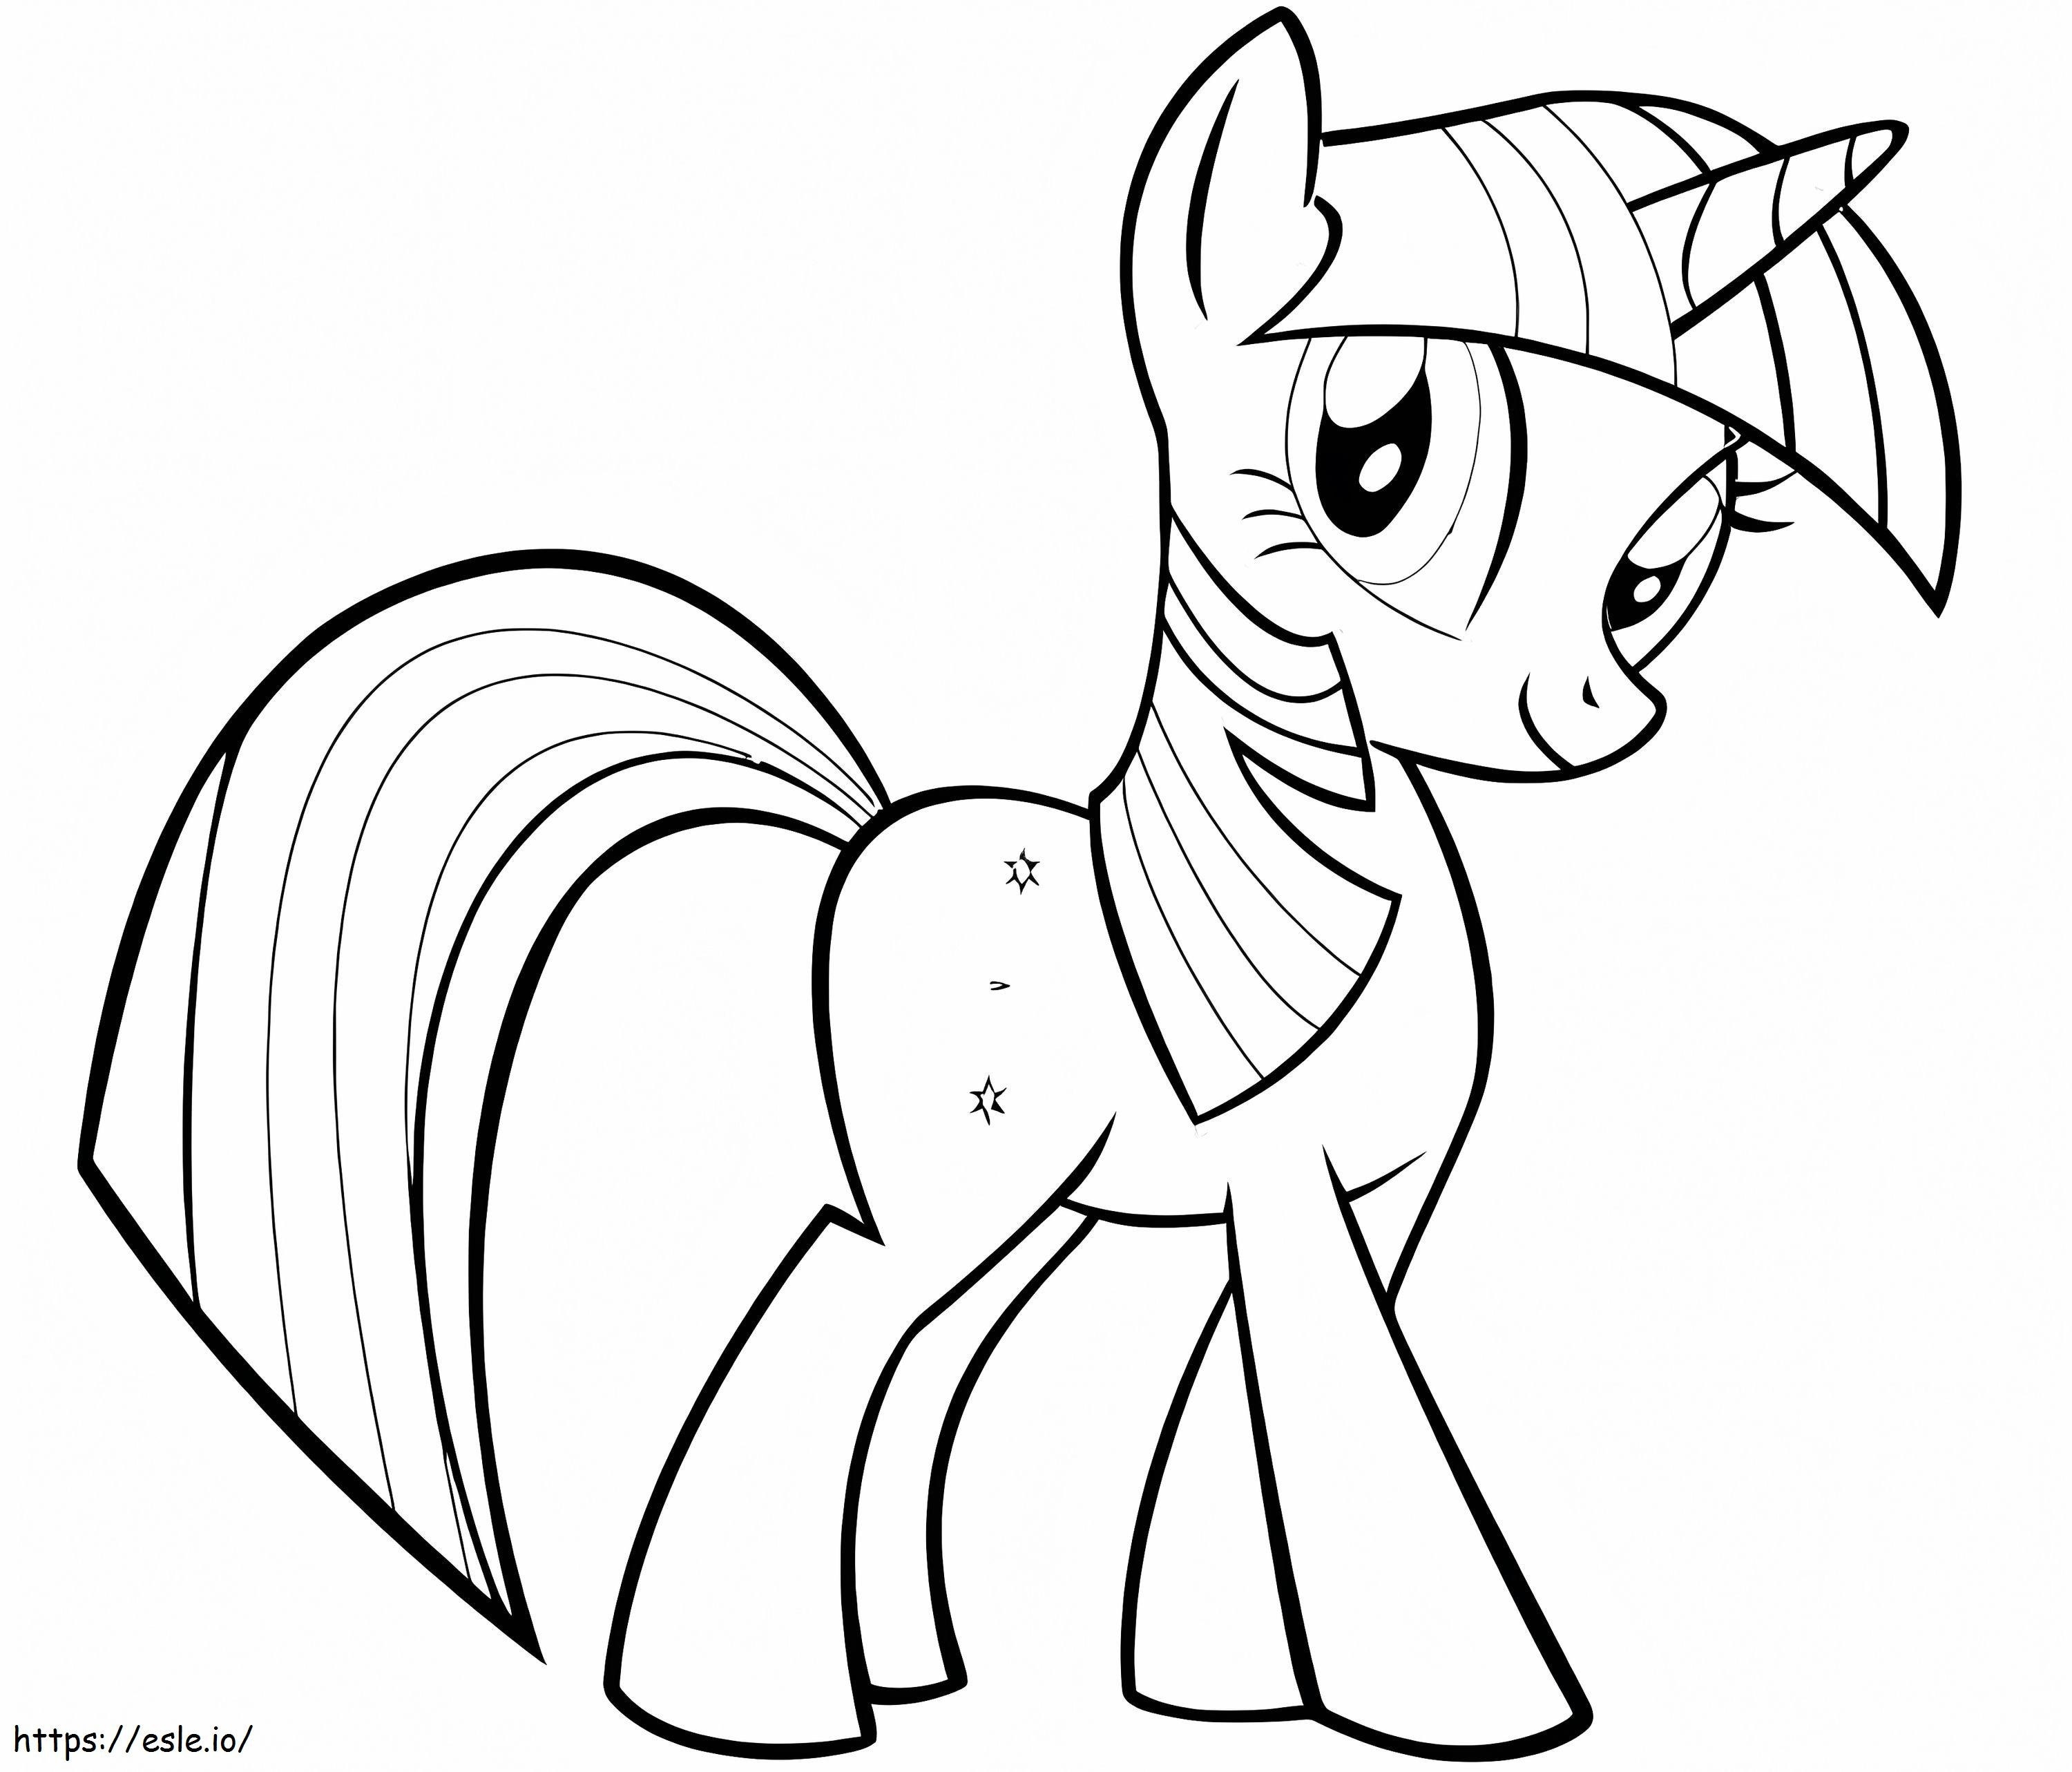 Free Twilight Sparkle coloring page